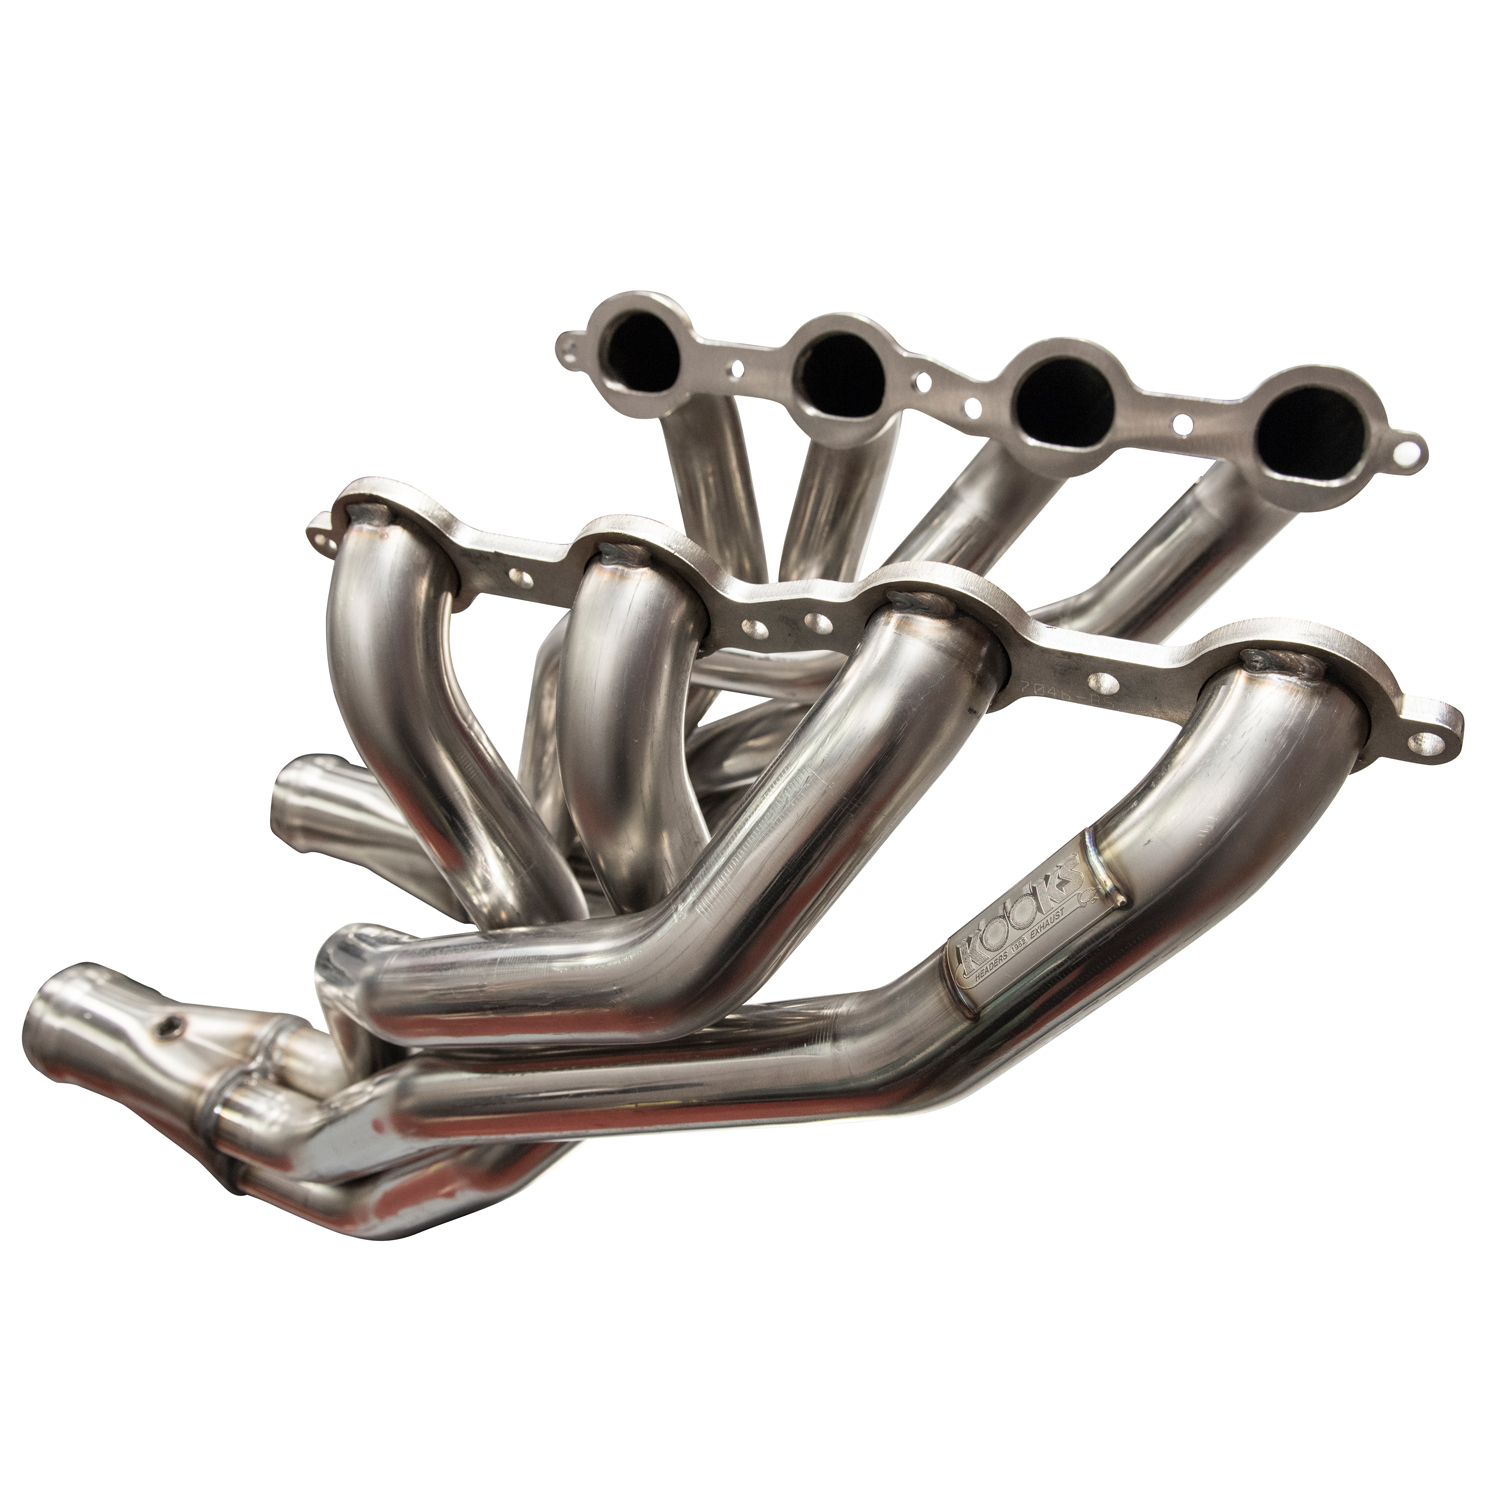 Stainless Steel Headers 2 x 3" Long Tube w/Torca Tight Connections And O2 Extensions